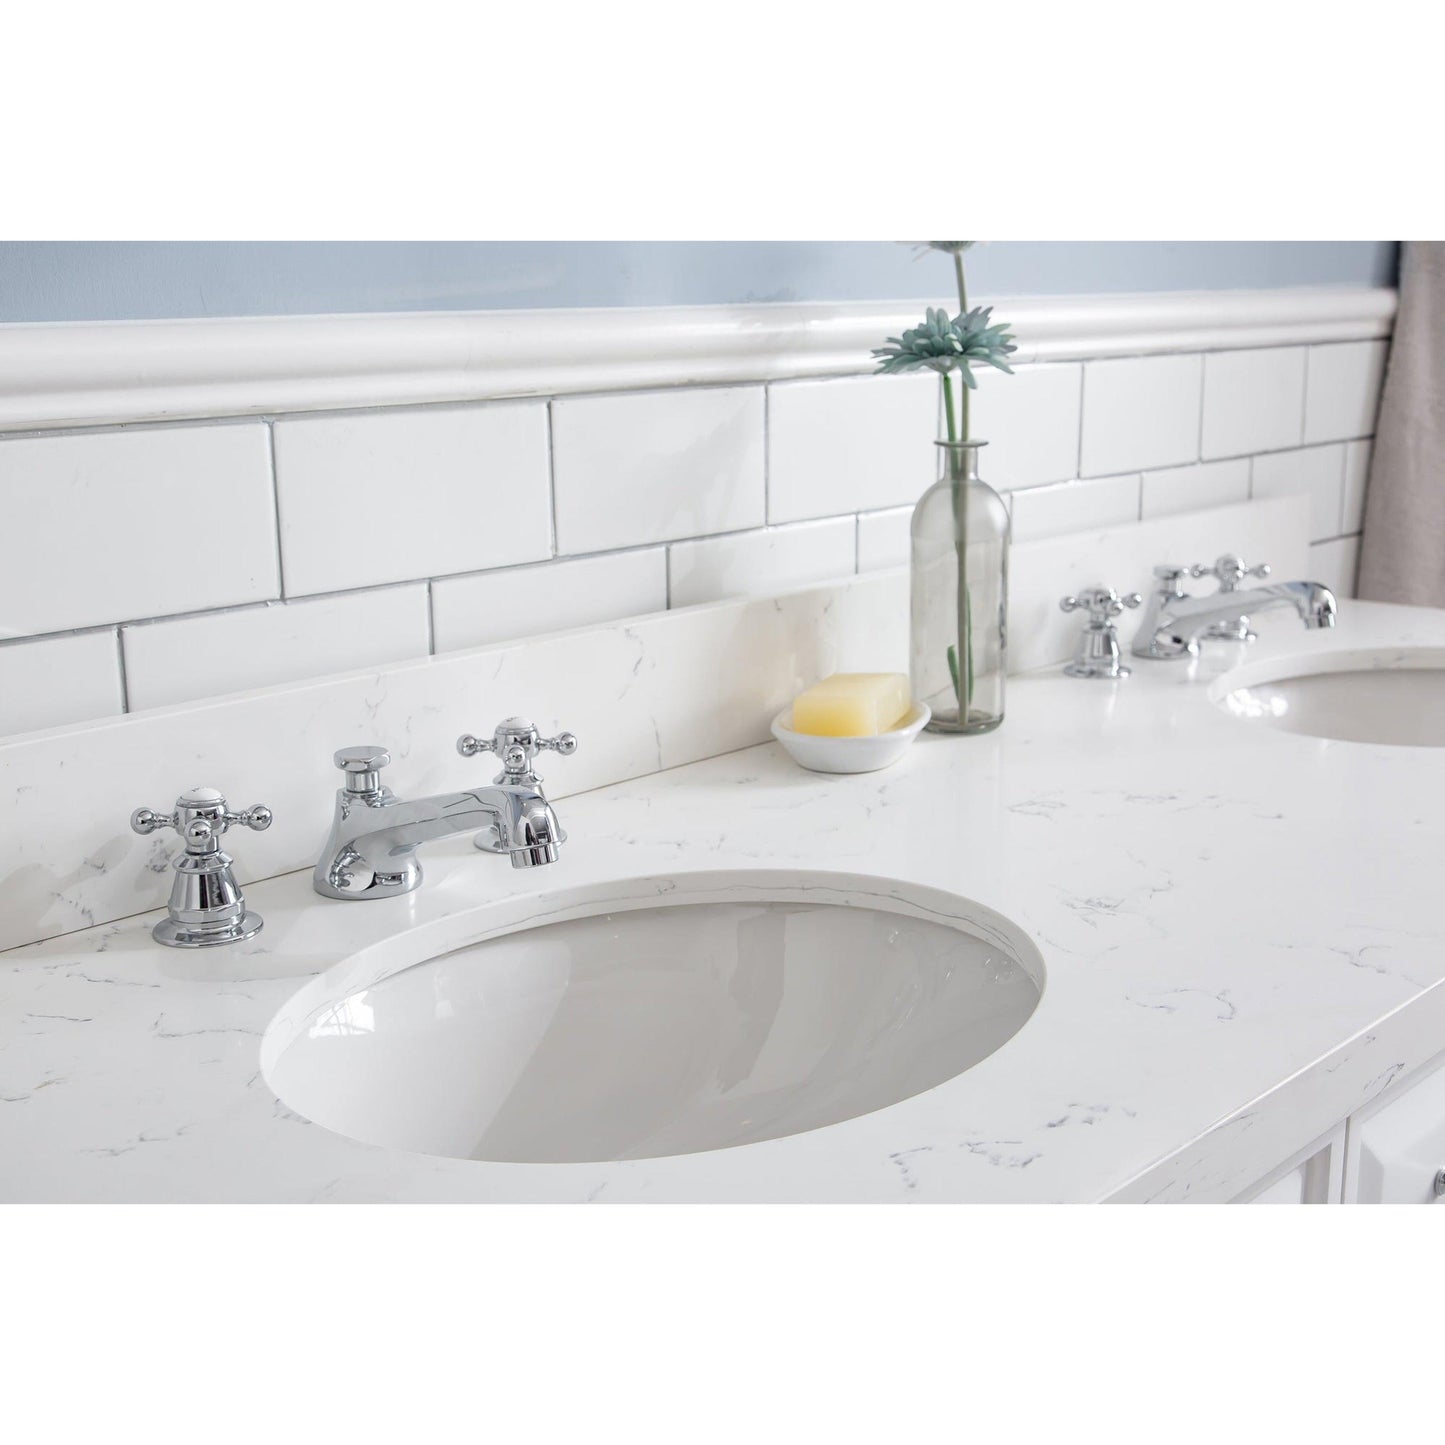 Water Creation Palace 60" Quartz Carrara Pure White Bathroom Vanity Set With Hardware And F2-0009 Faucets in Chrome Finish